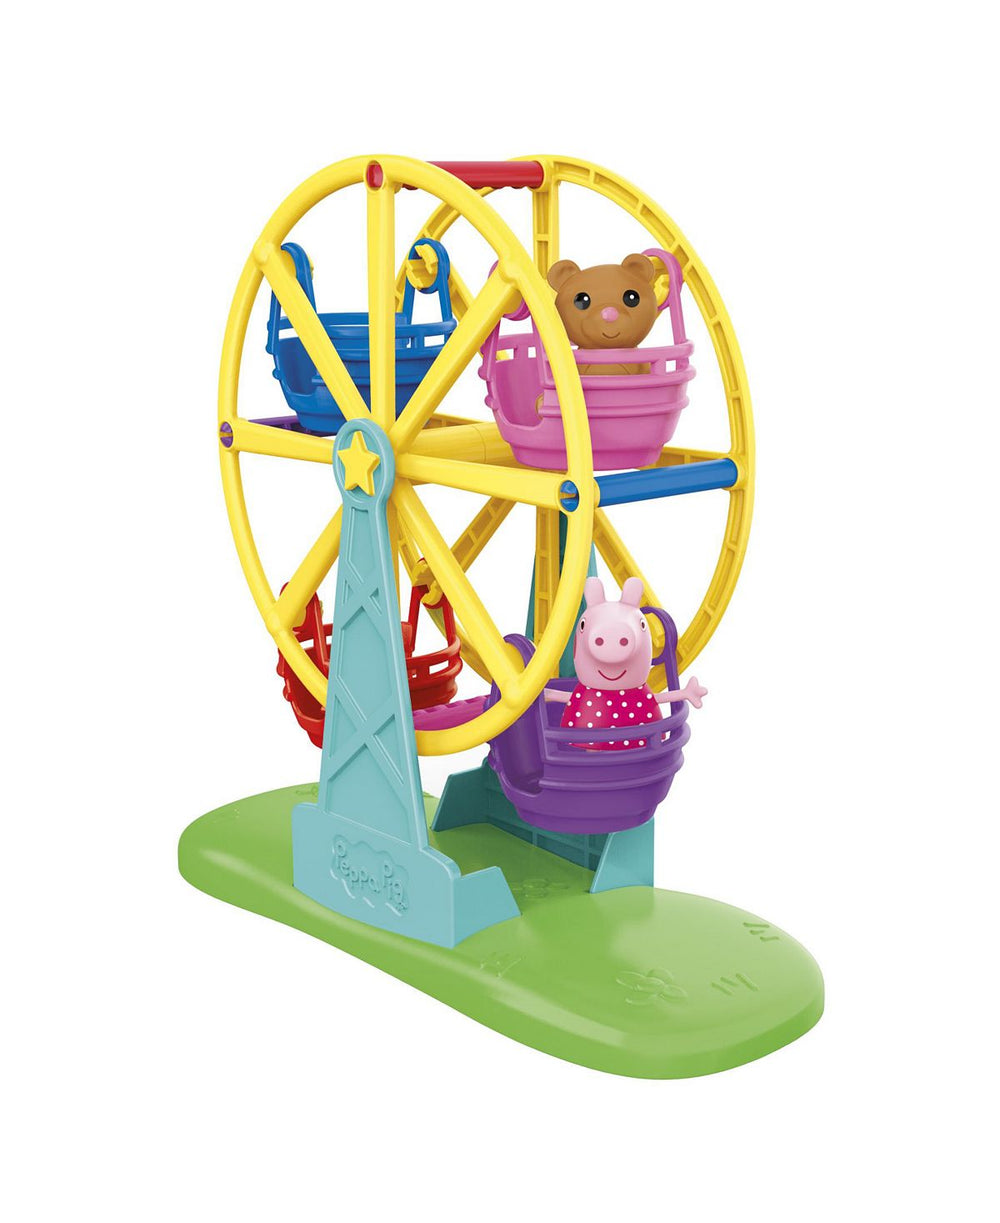 Peppa Pig Ferris Wheel Playset with Spinning Feature and Figures